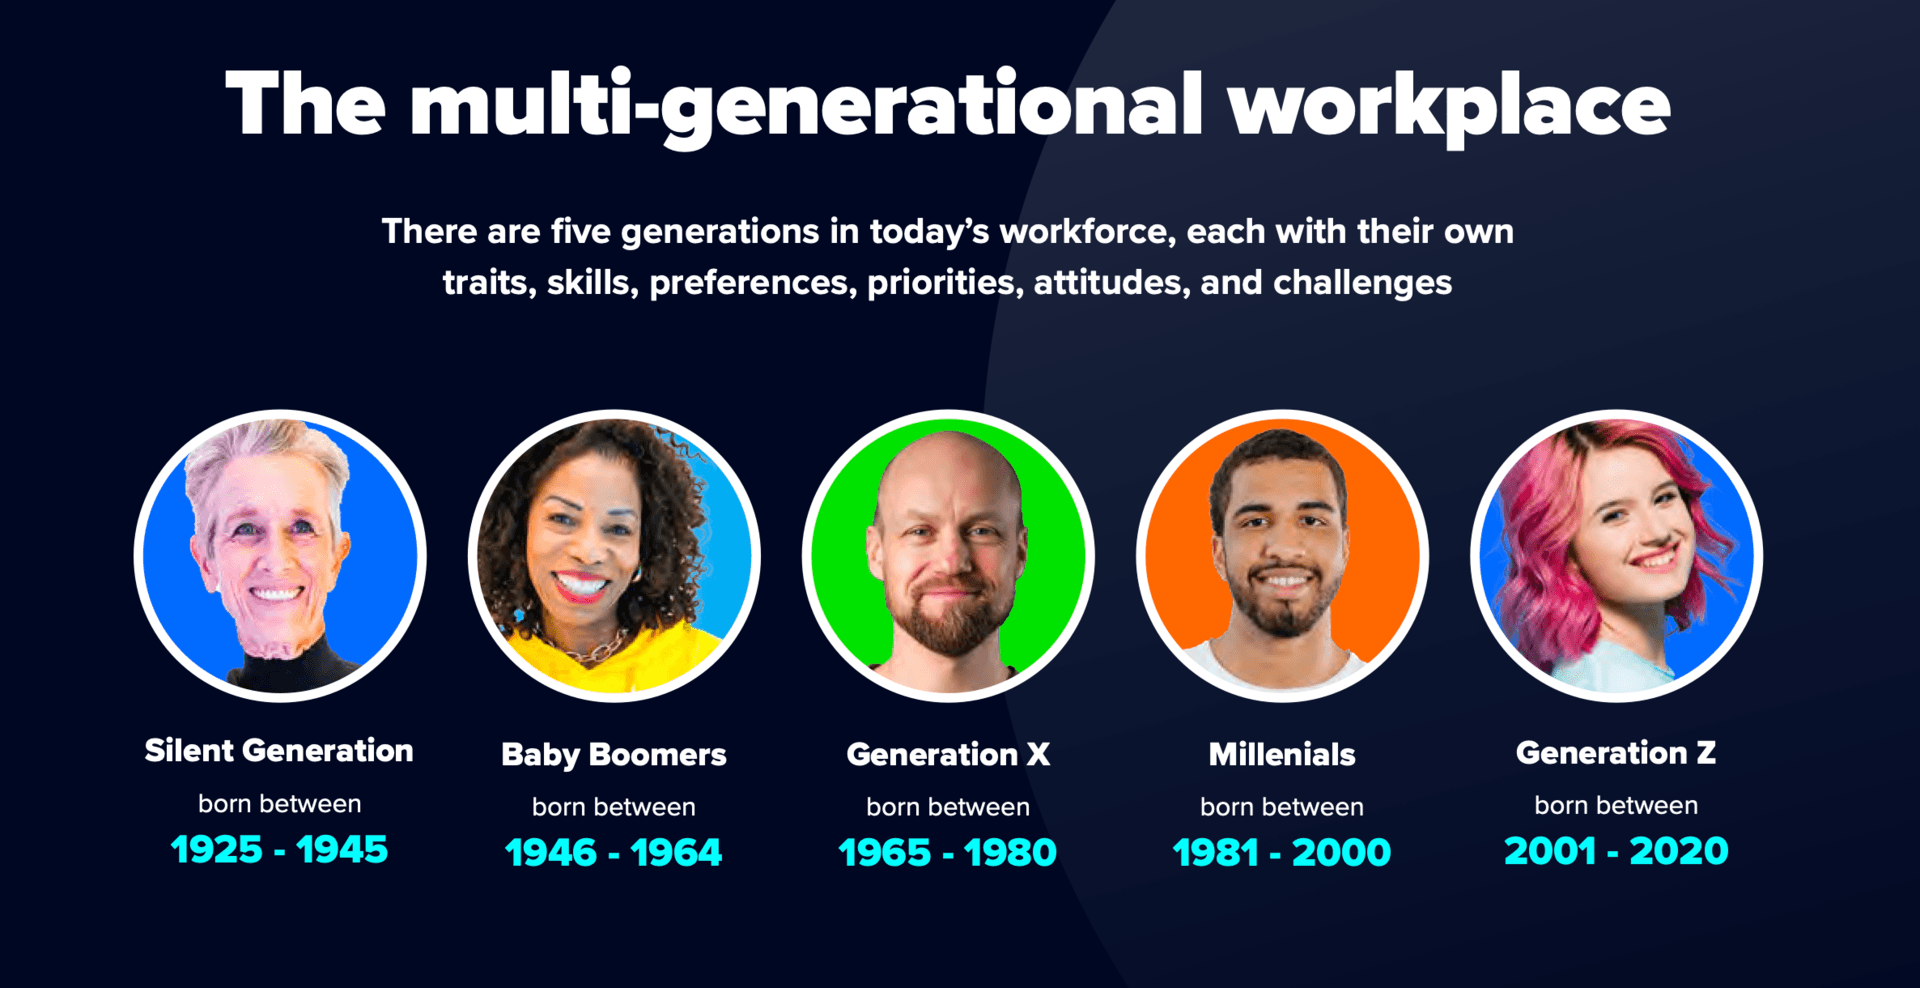 The multi-generational workplace